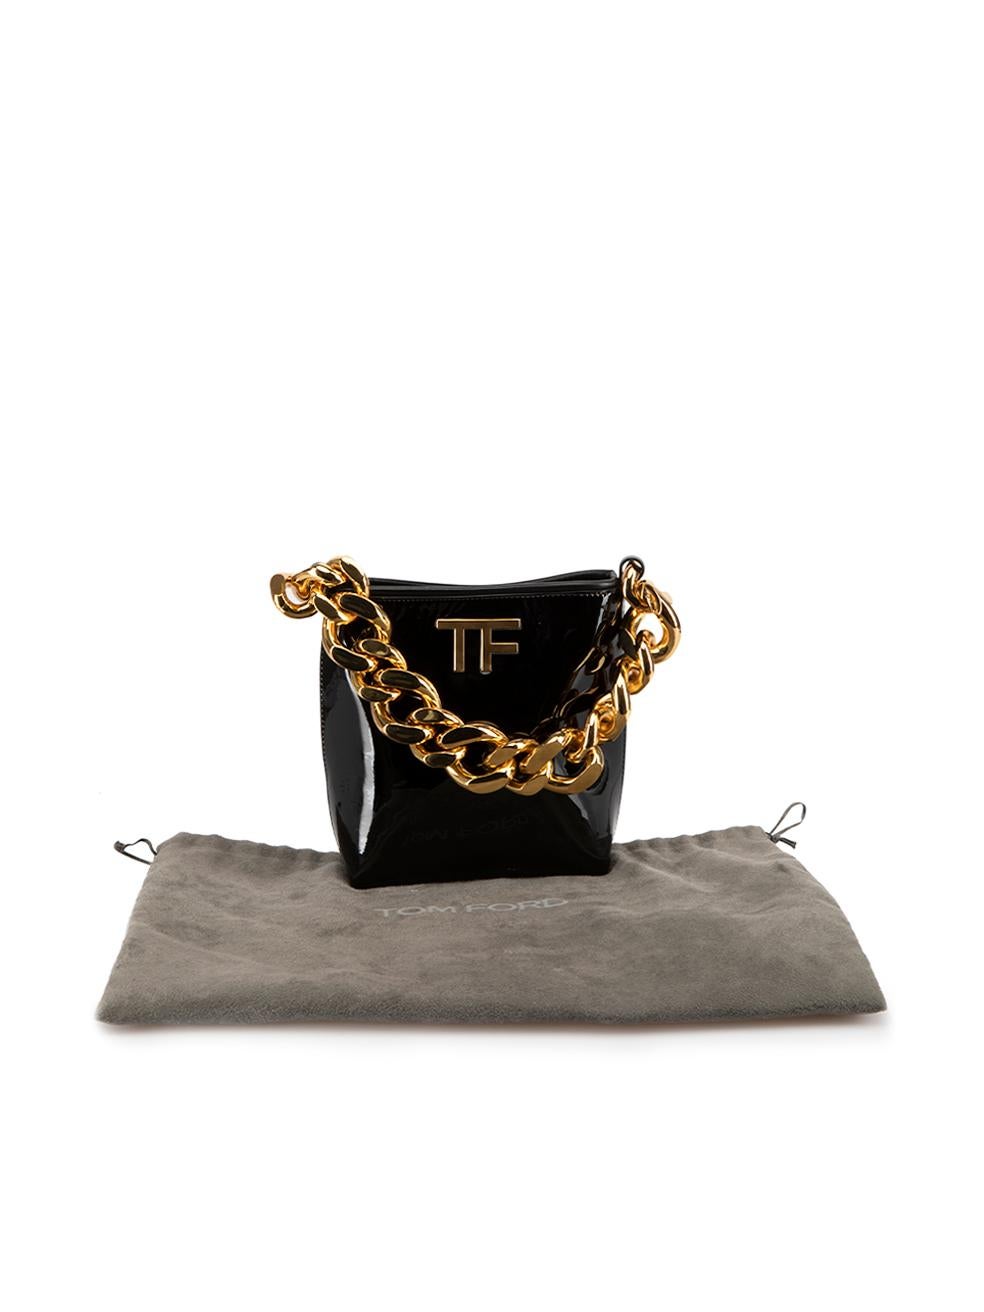 Tom Ford Women's Black Patent Leather TF Maxi Chain Bag 3